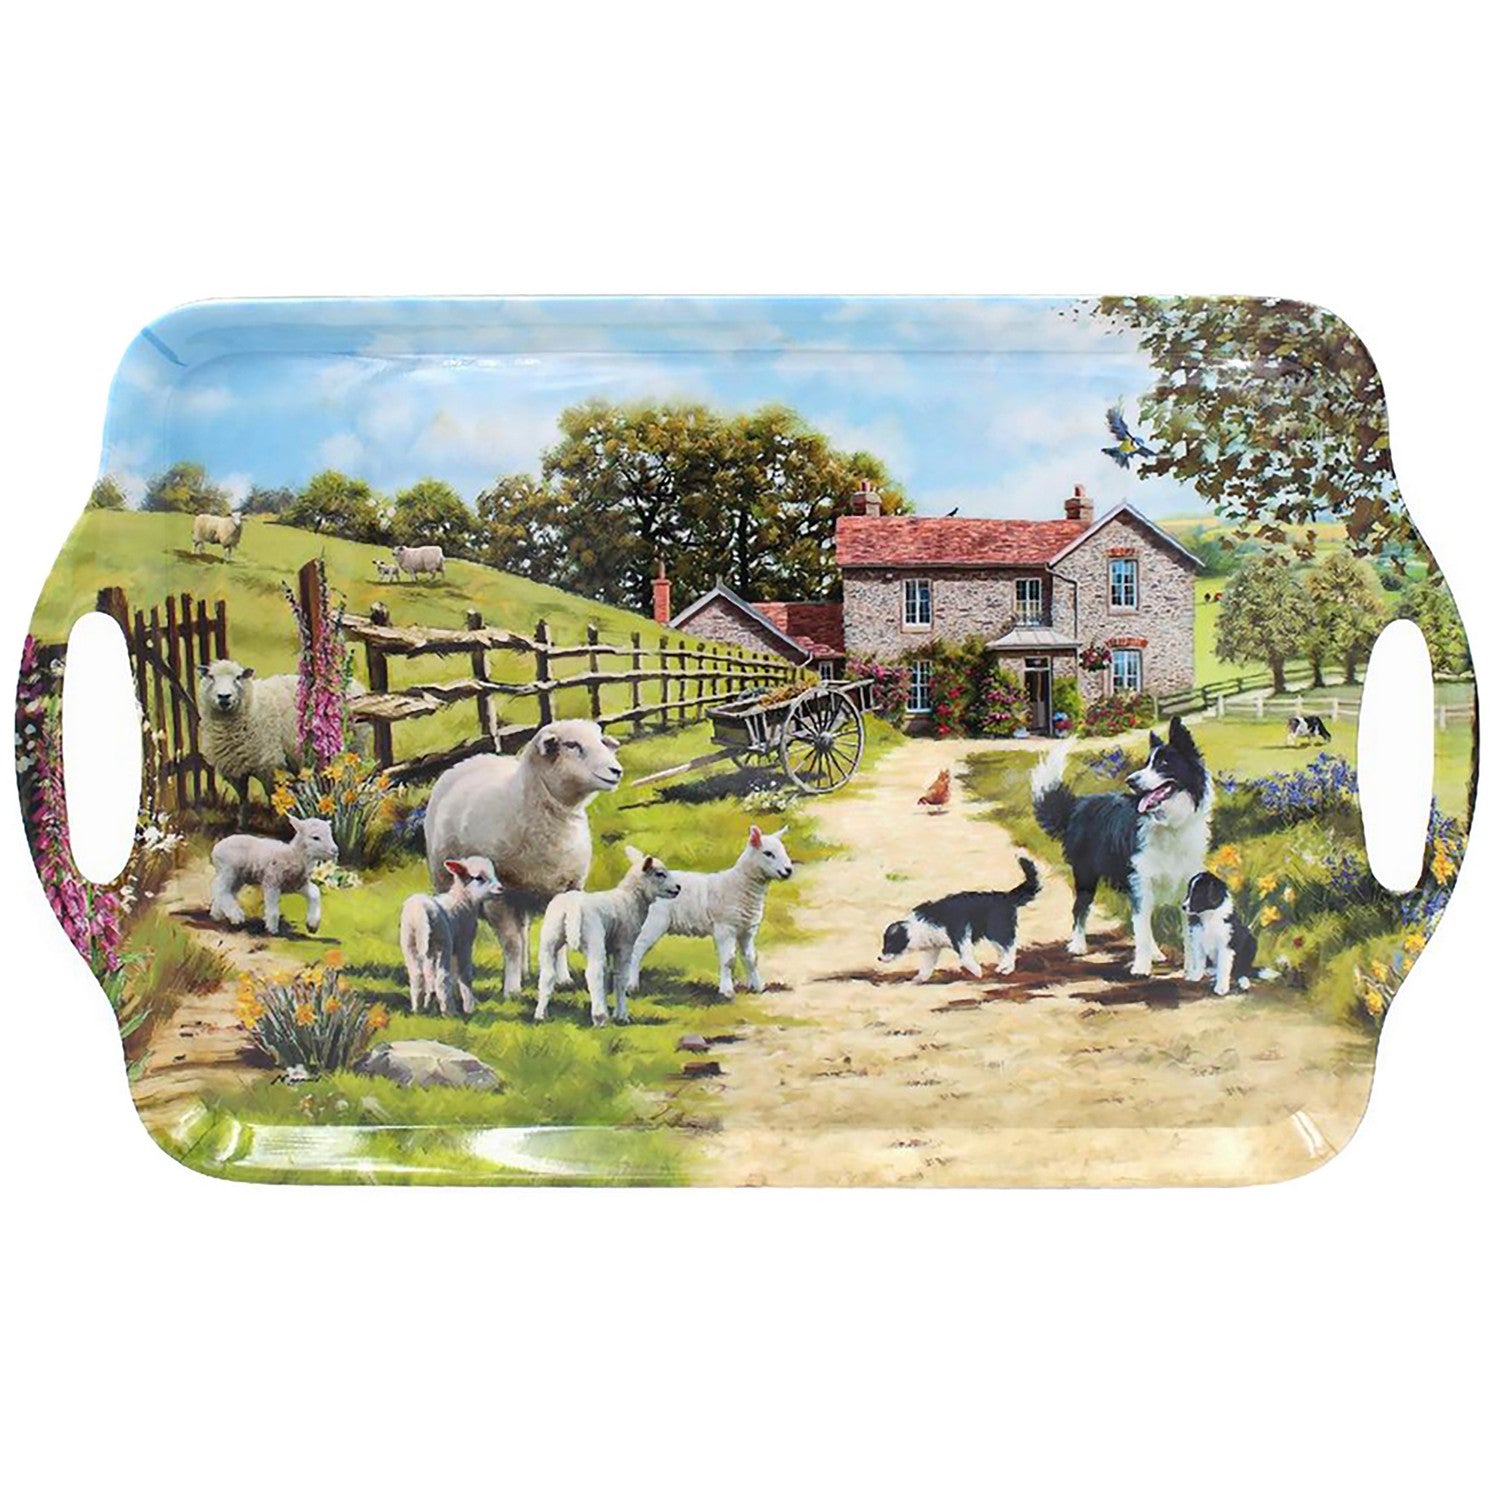 Collie & Sheep Design Large Serving Tray